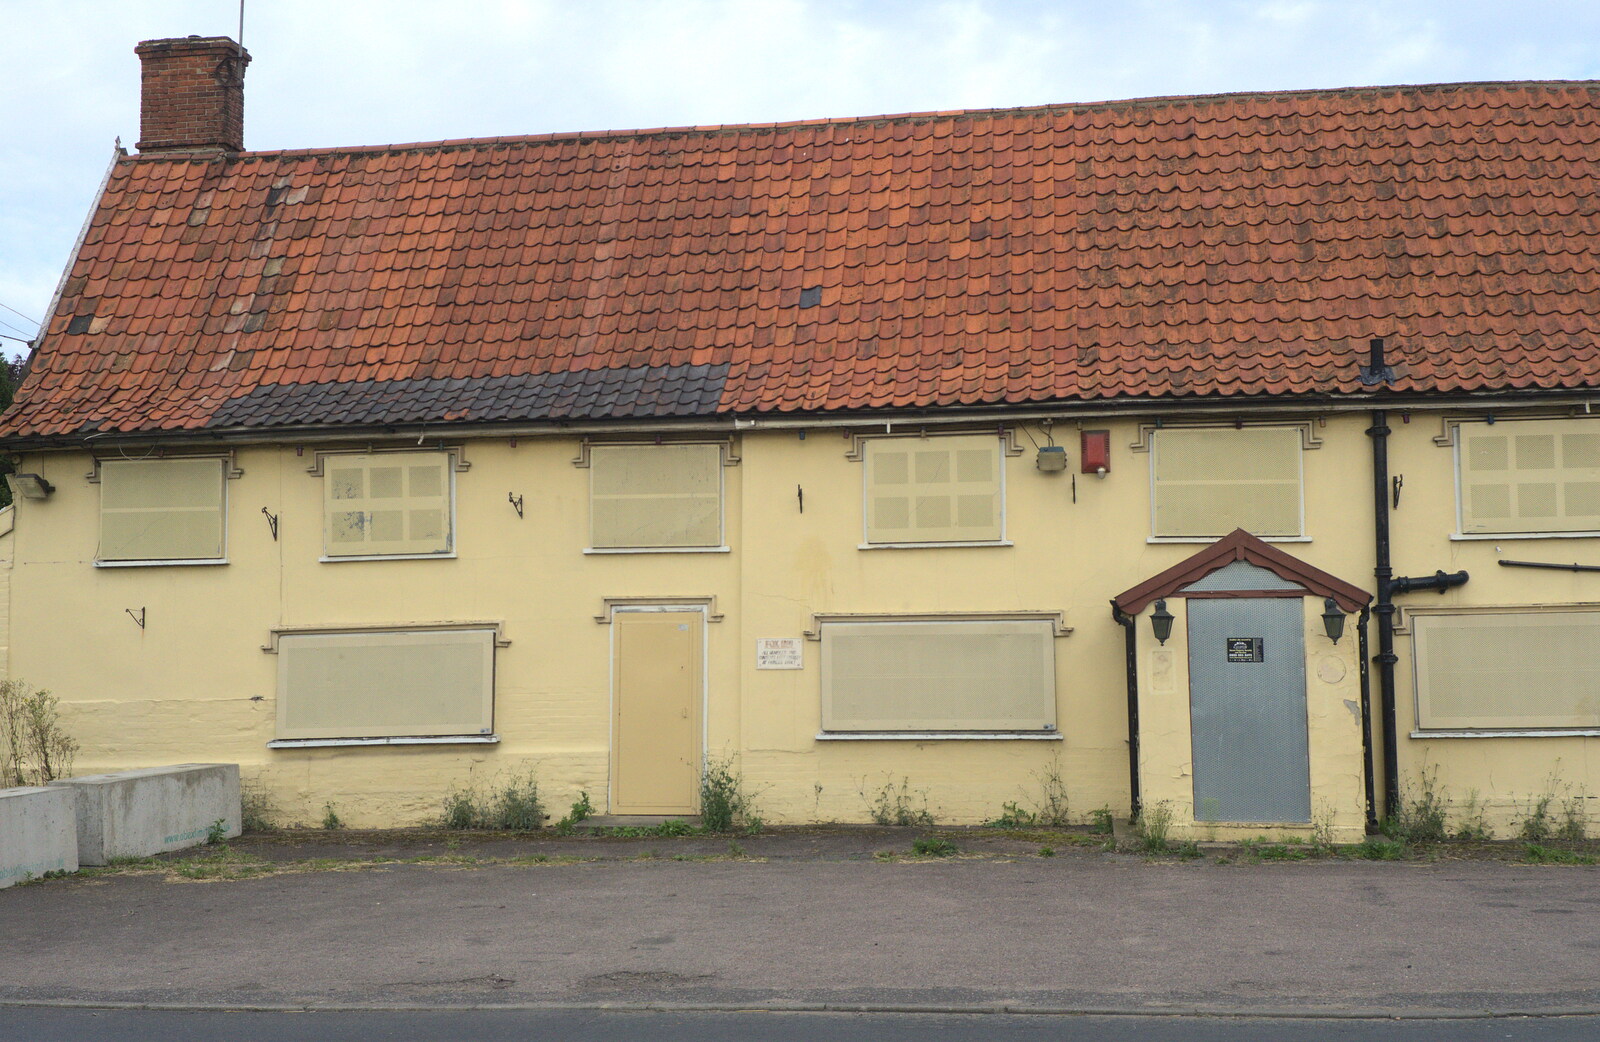 The sad sight of a boarded-up pub from Camping at Dower House, West Harling, Norfolk - 1st September 2012